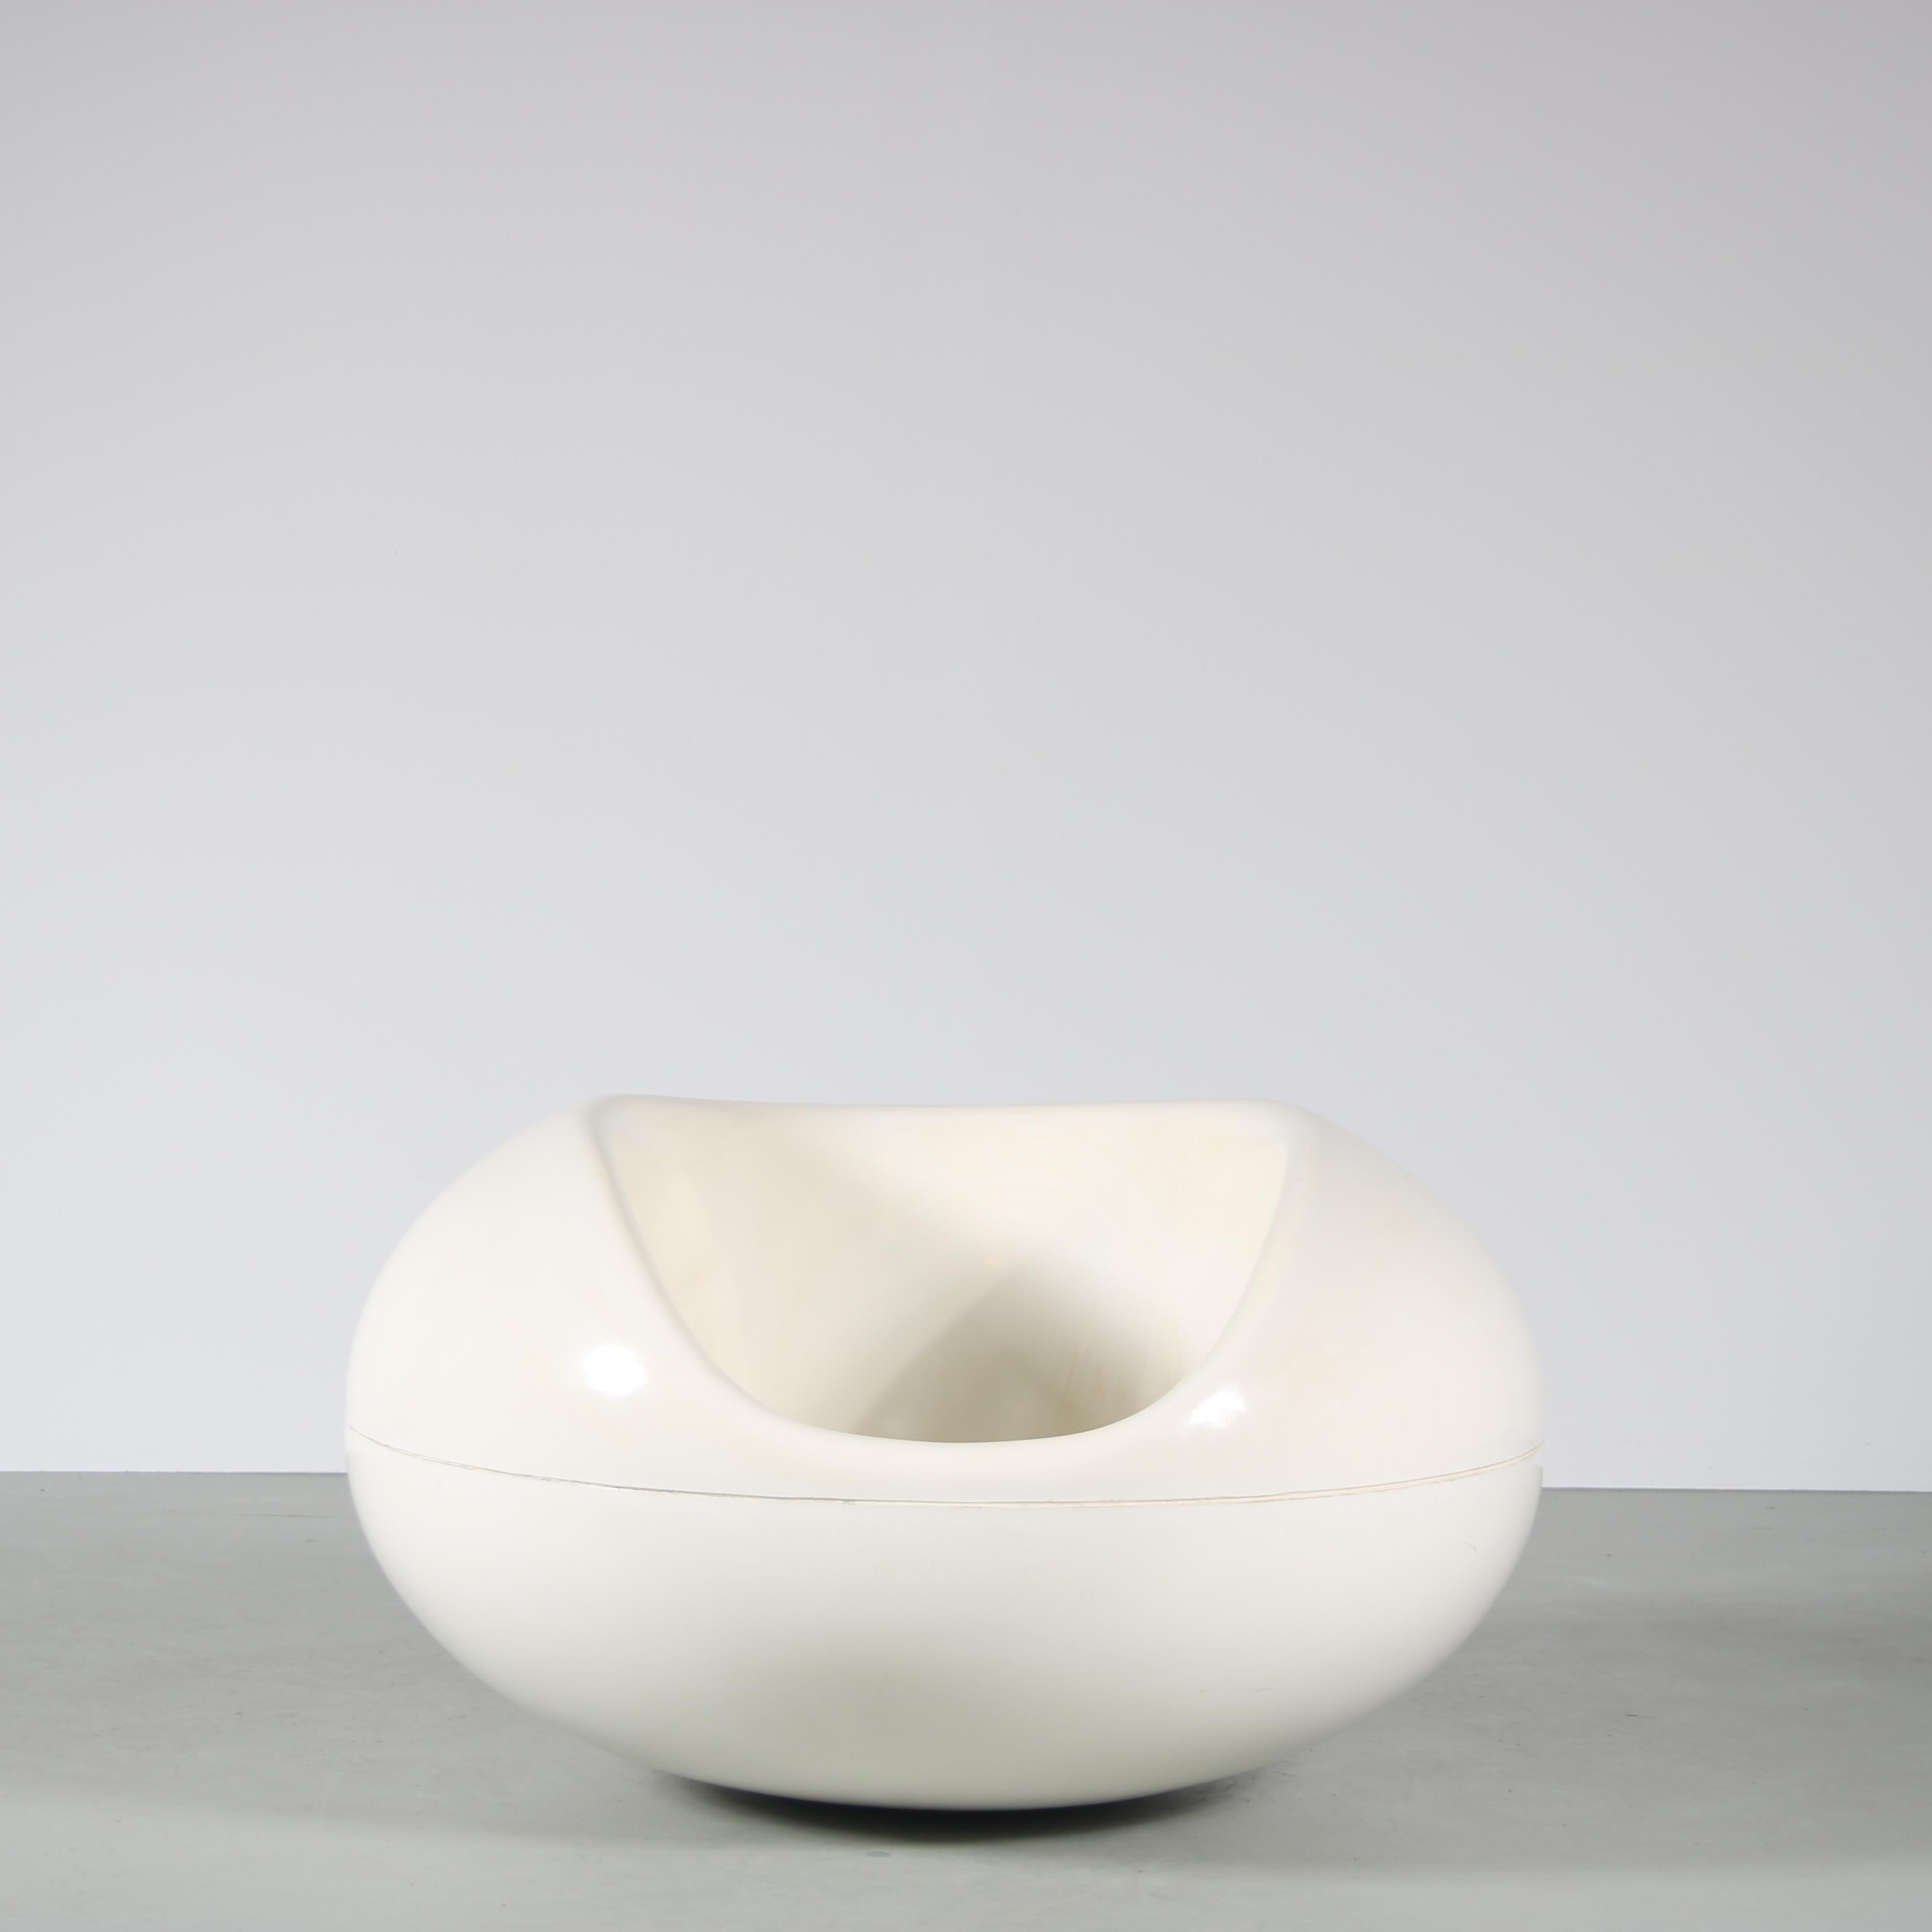 Plastic 1970s “Pastil” Chair by Eero Aarnio for Asko, Finland